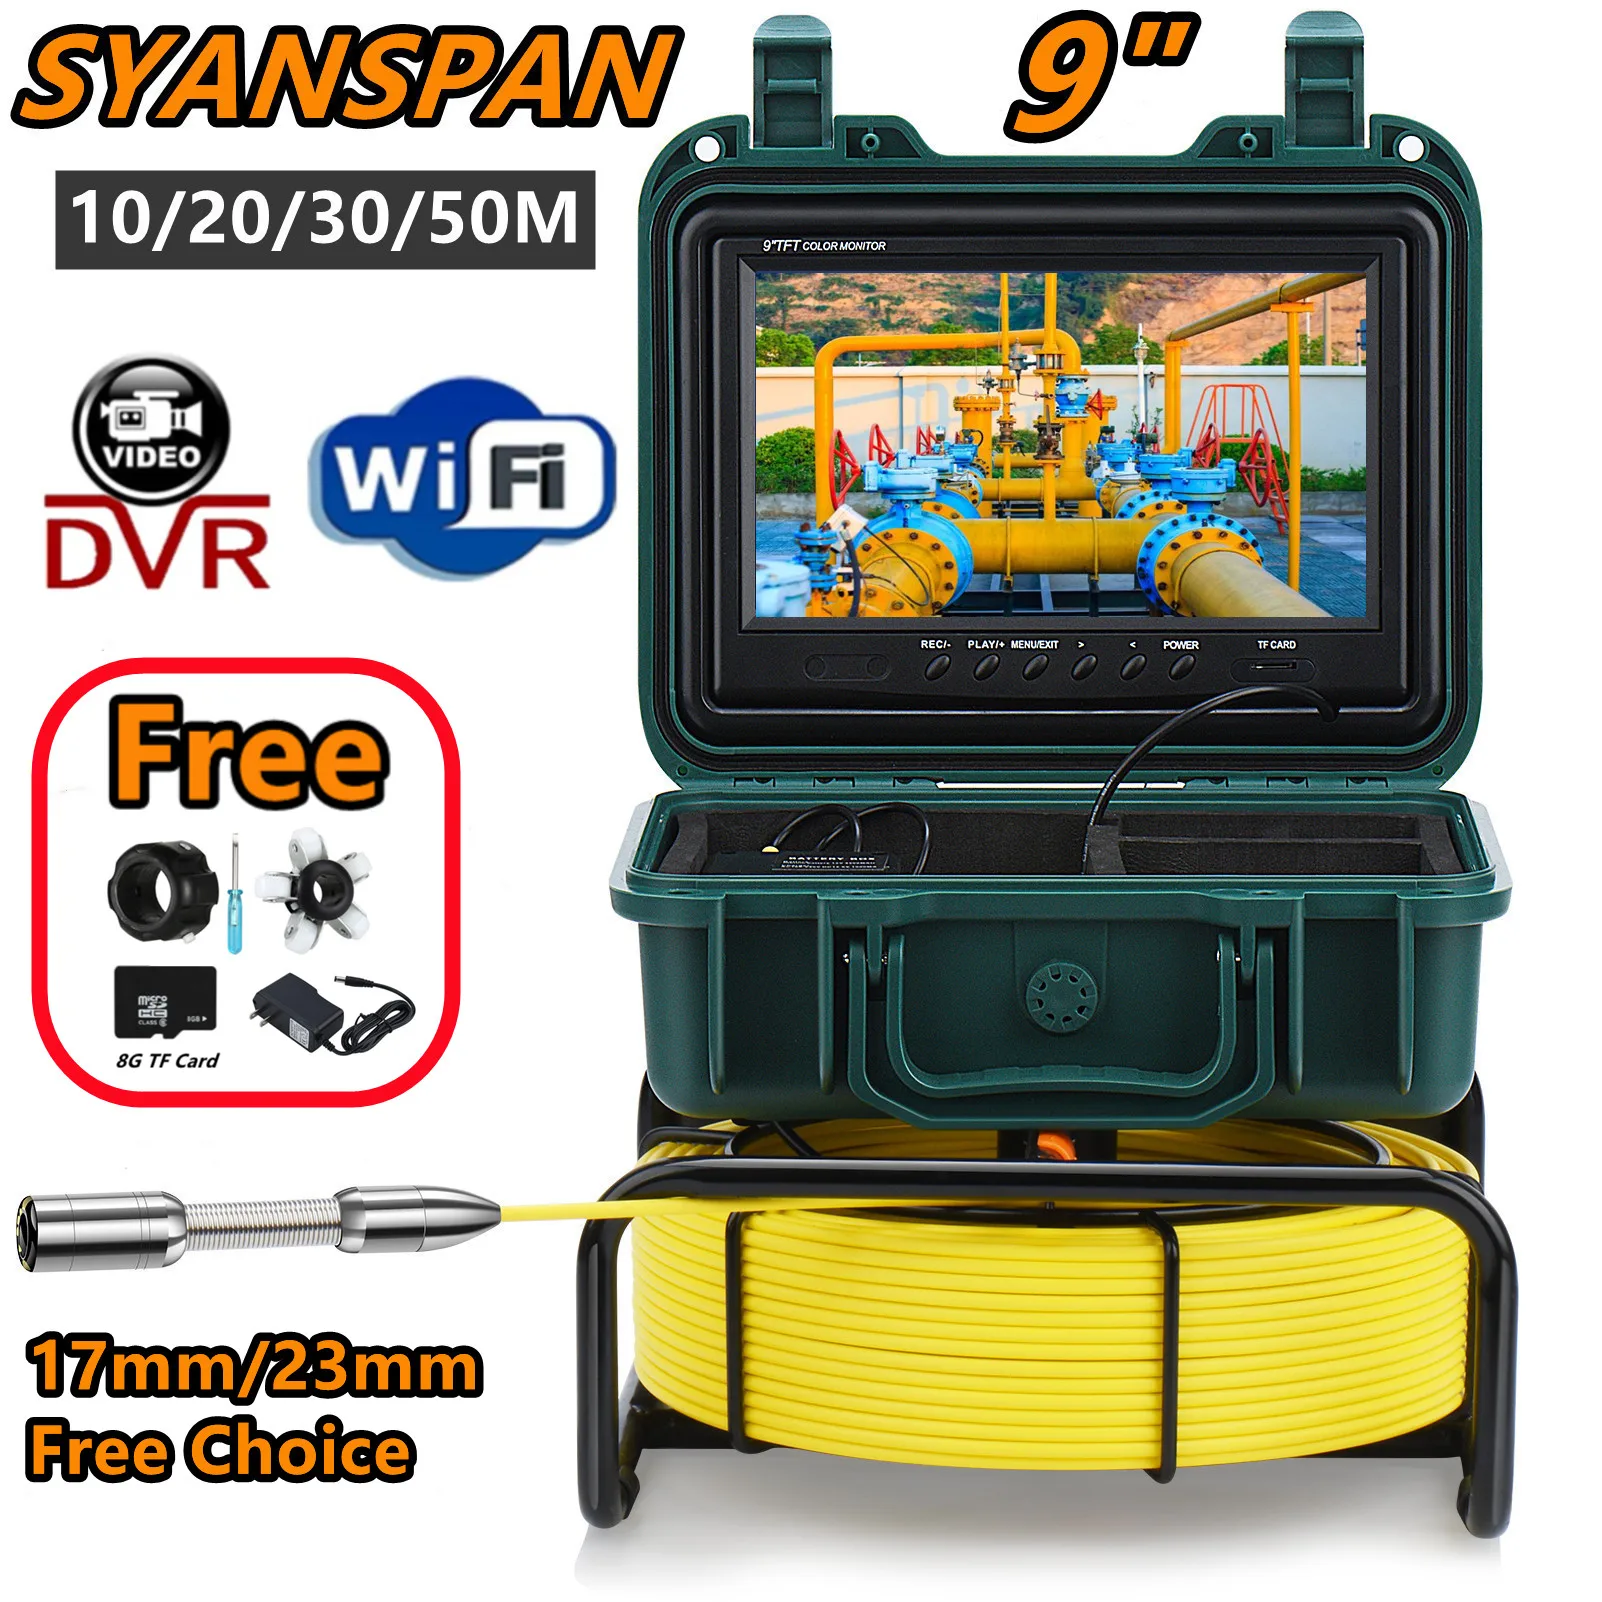 

9" HD Screen DVR/WiFi 8GB Card IP68 20/30/50M SYANSPAN Pipe Inspection Camera 23mm Drain Sewer Pipeline Industrial Endoscope